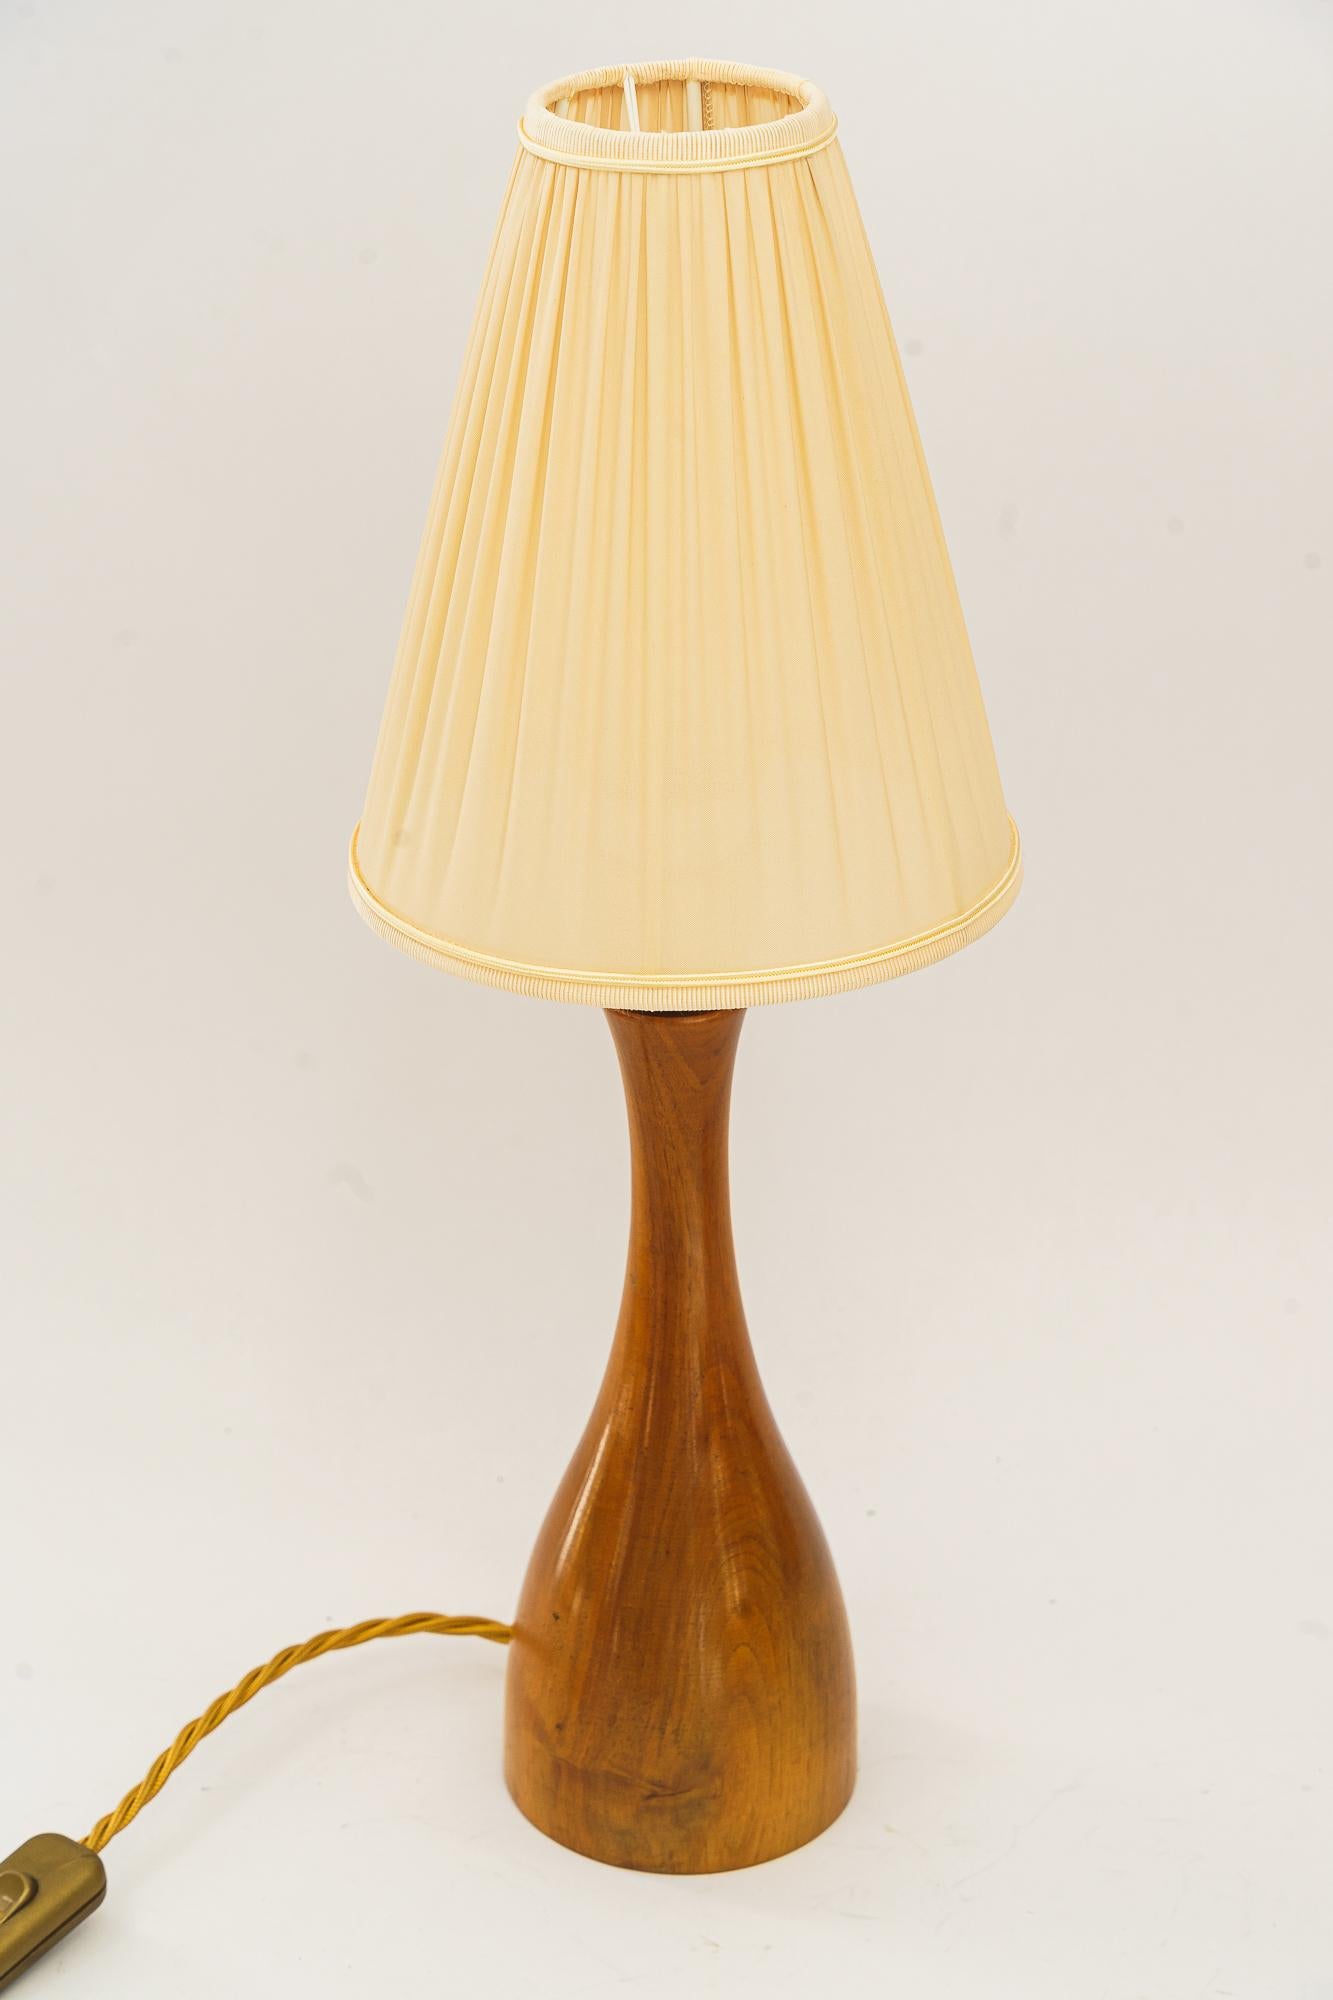 Rupert Nikoll cerry wood table lamp with fabric shade vienna around 1950s
Wood polished
Brass polished and stove enameled
The fabric shade is replaced ( new )